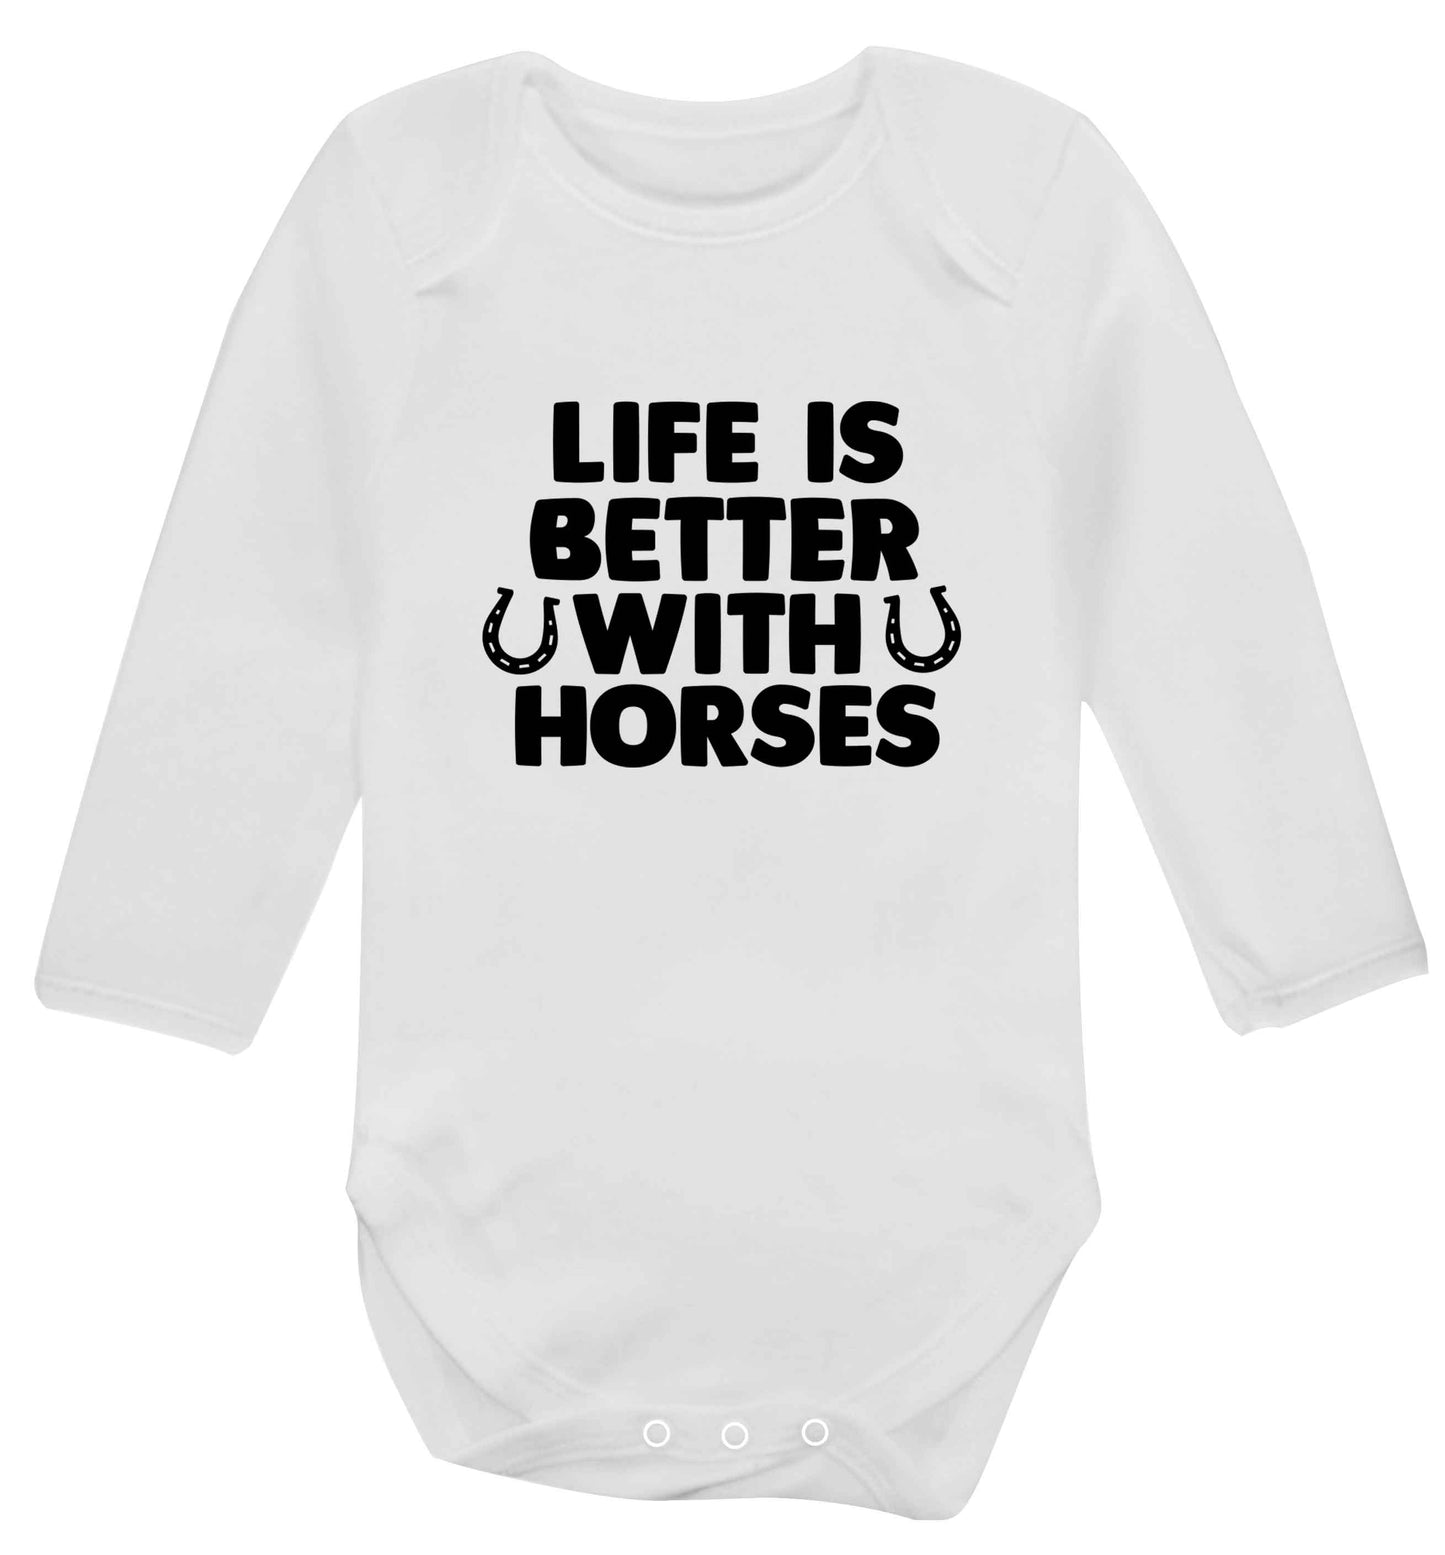 Life is better with horses baby vest long sleeved white 6-12 months